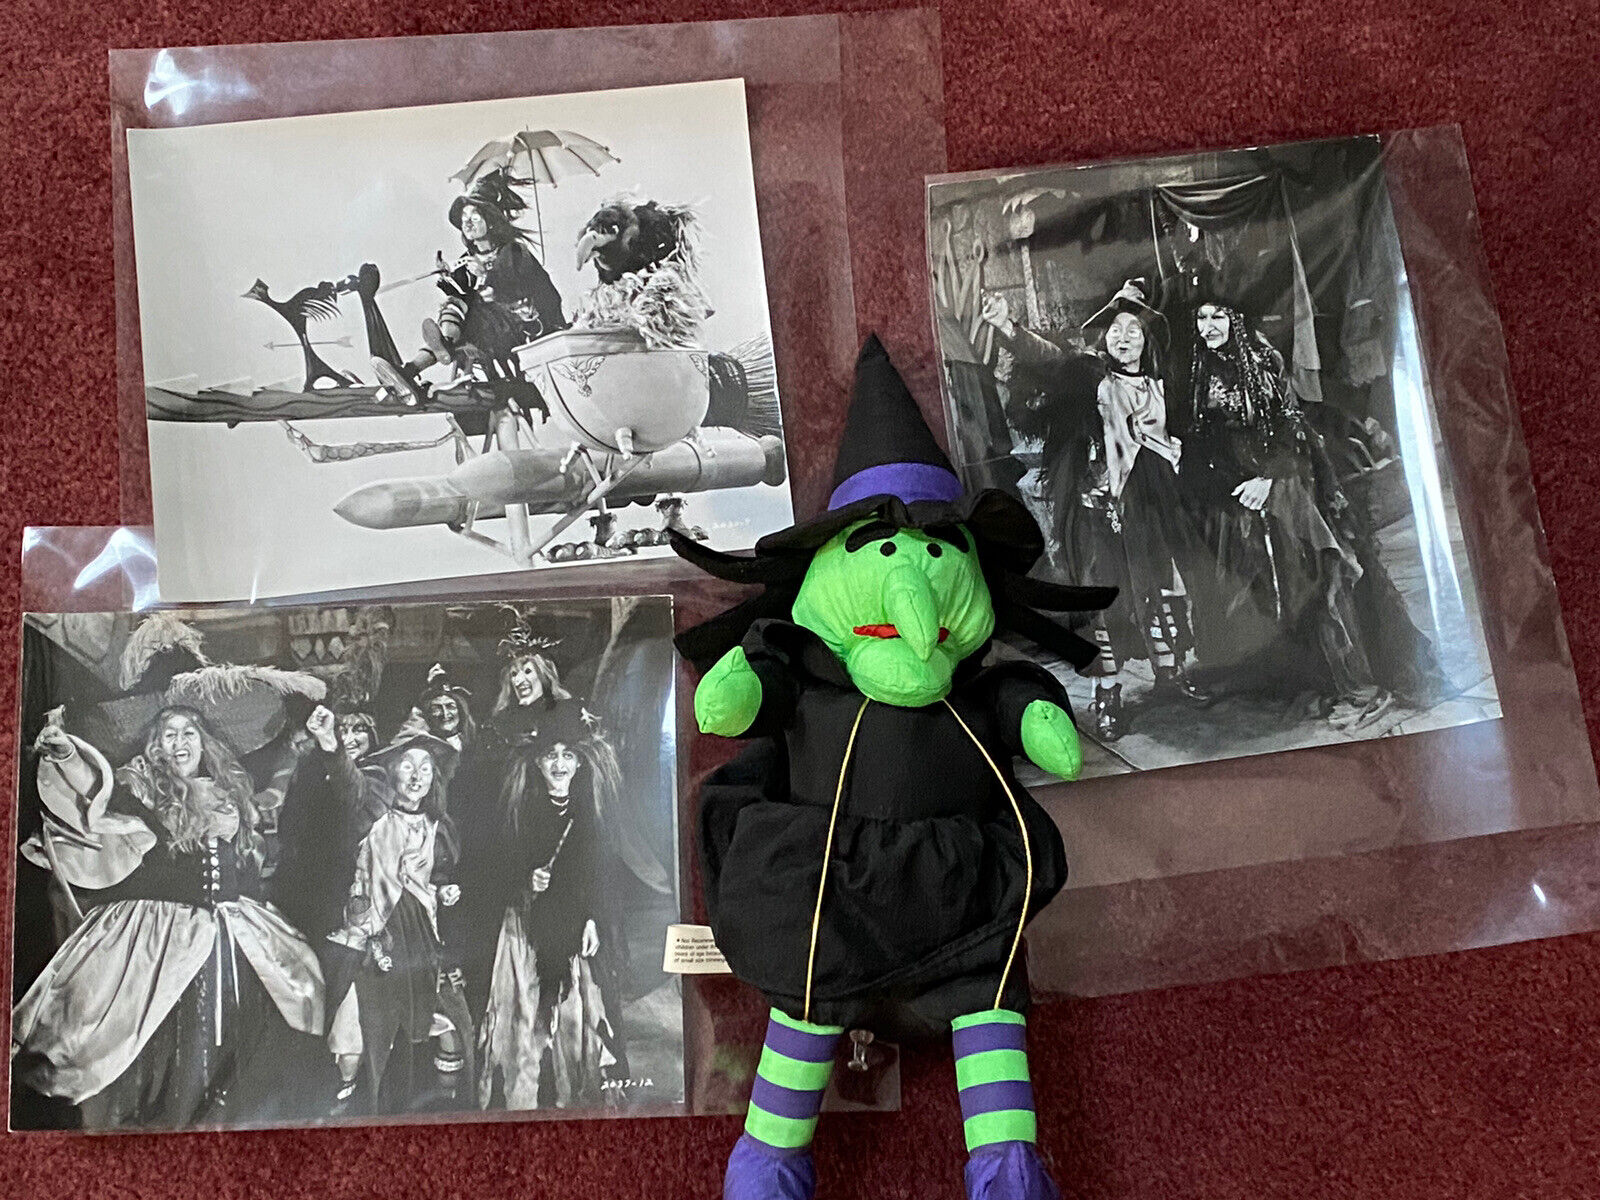 Marilyn Manson -bassist Gidget Gein’s Witchiepoo Doll And 3 Photos Of Witchiepoo